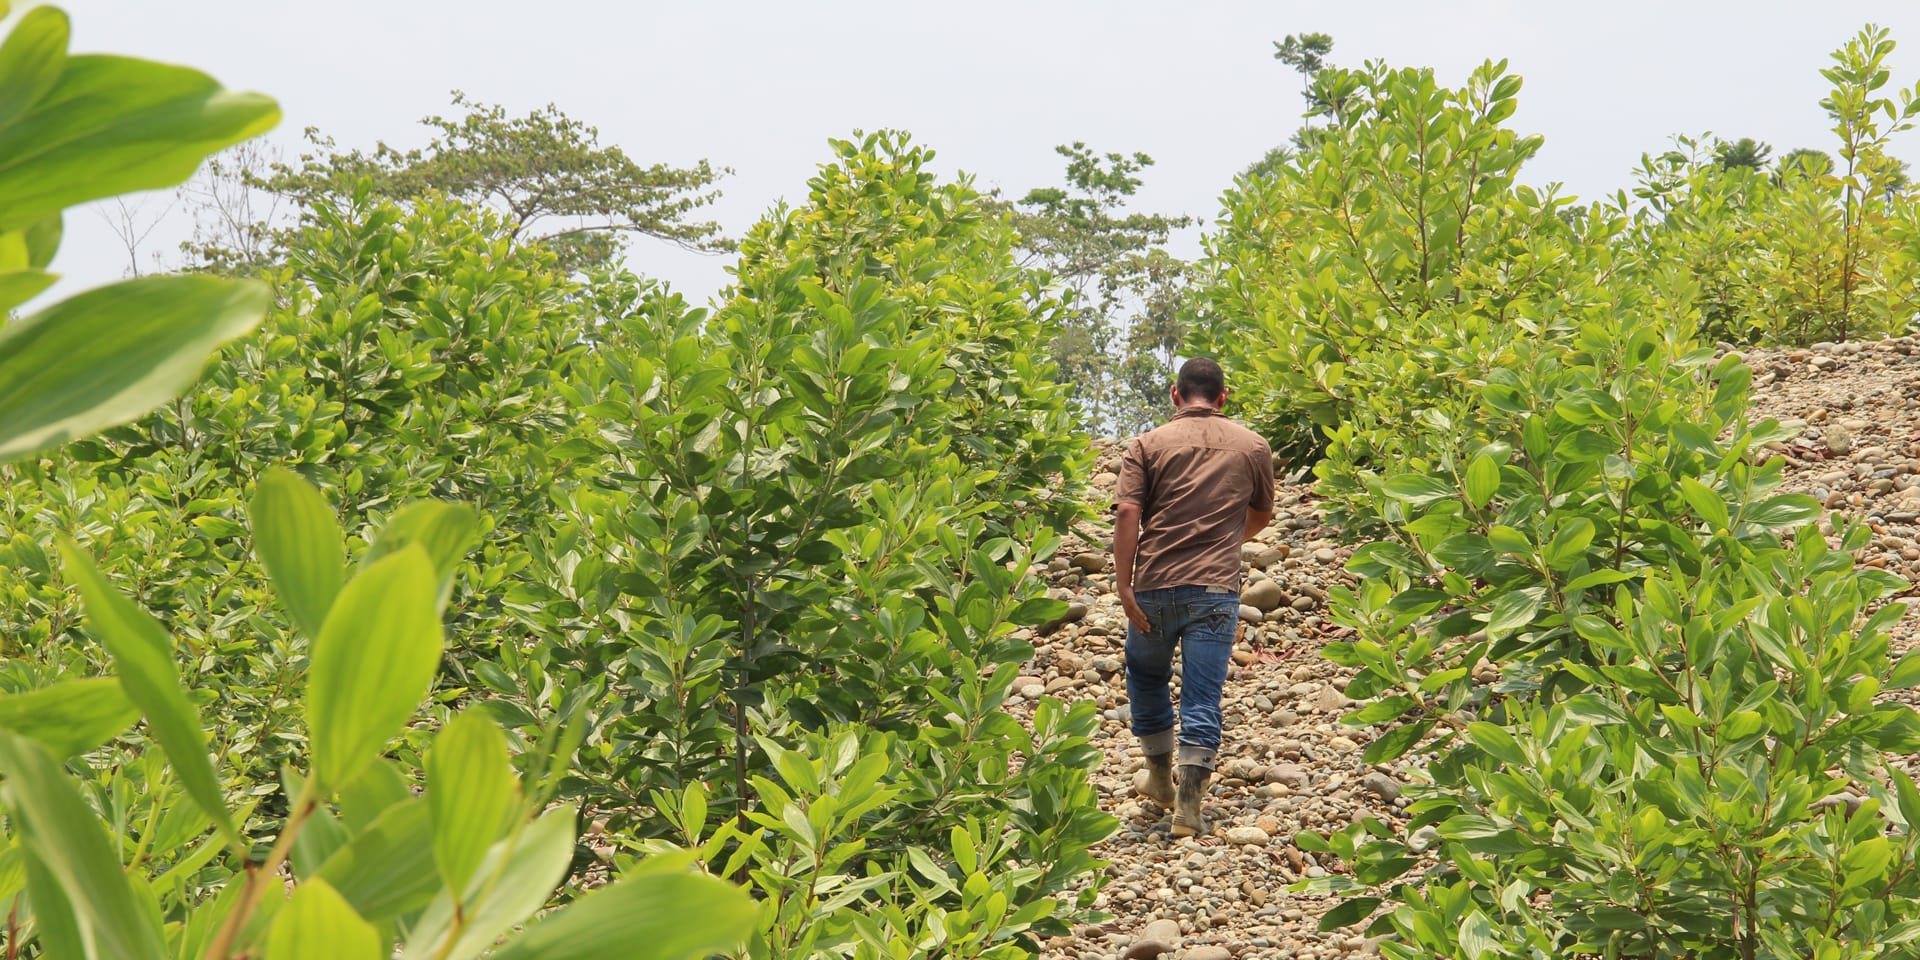 Image of a man walking up a hill between rows of bright green plants.